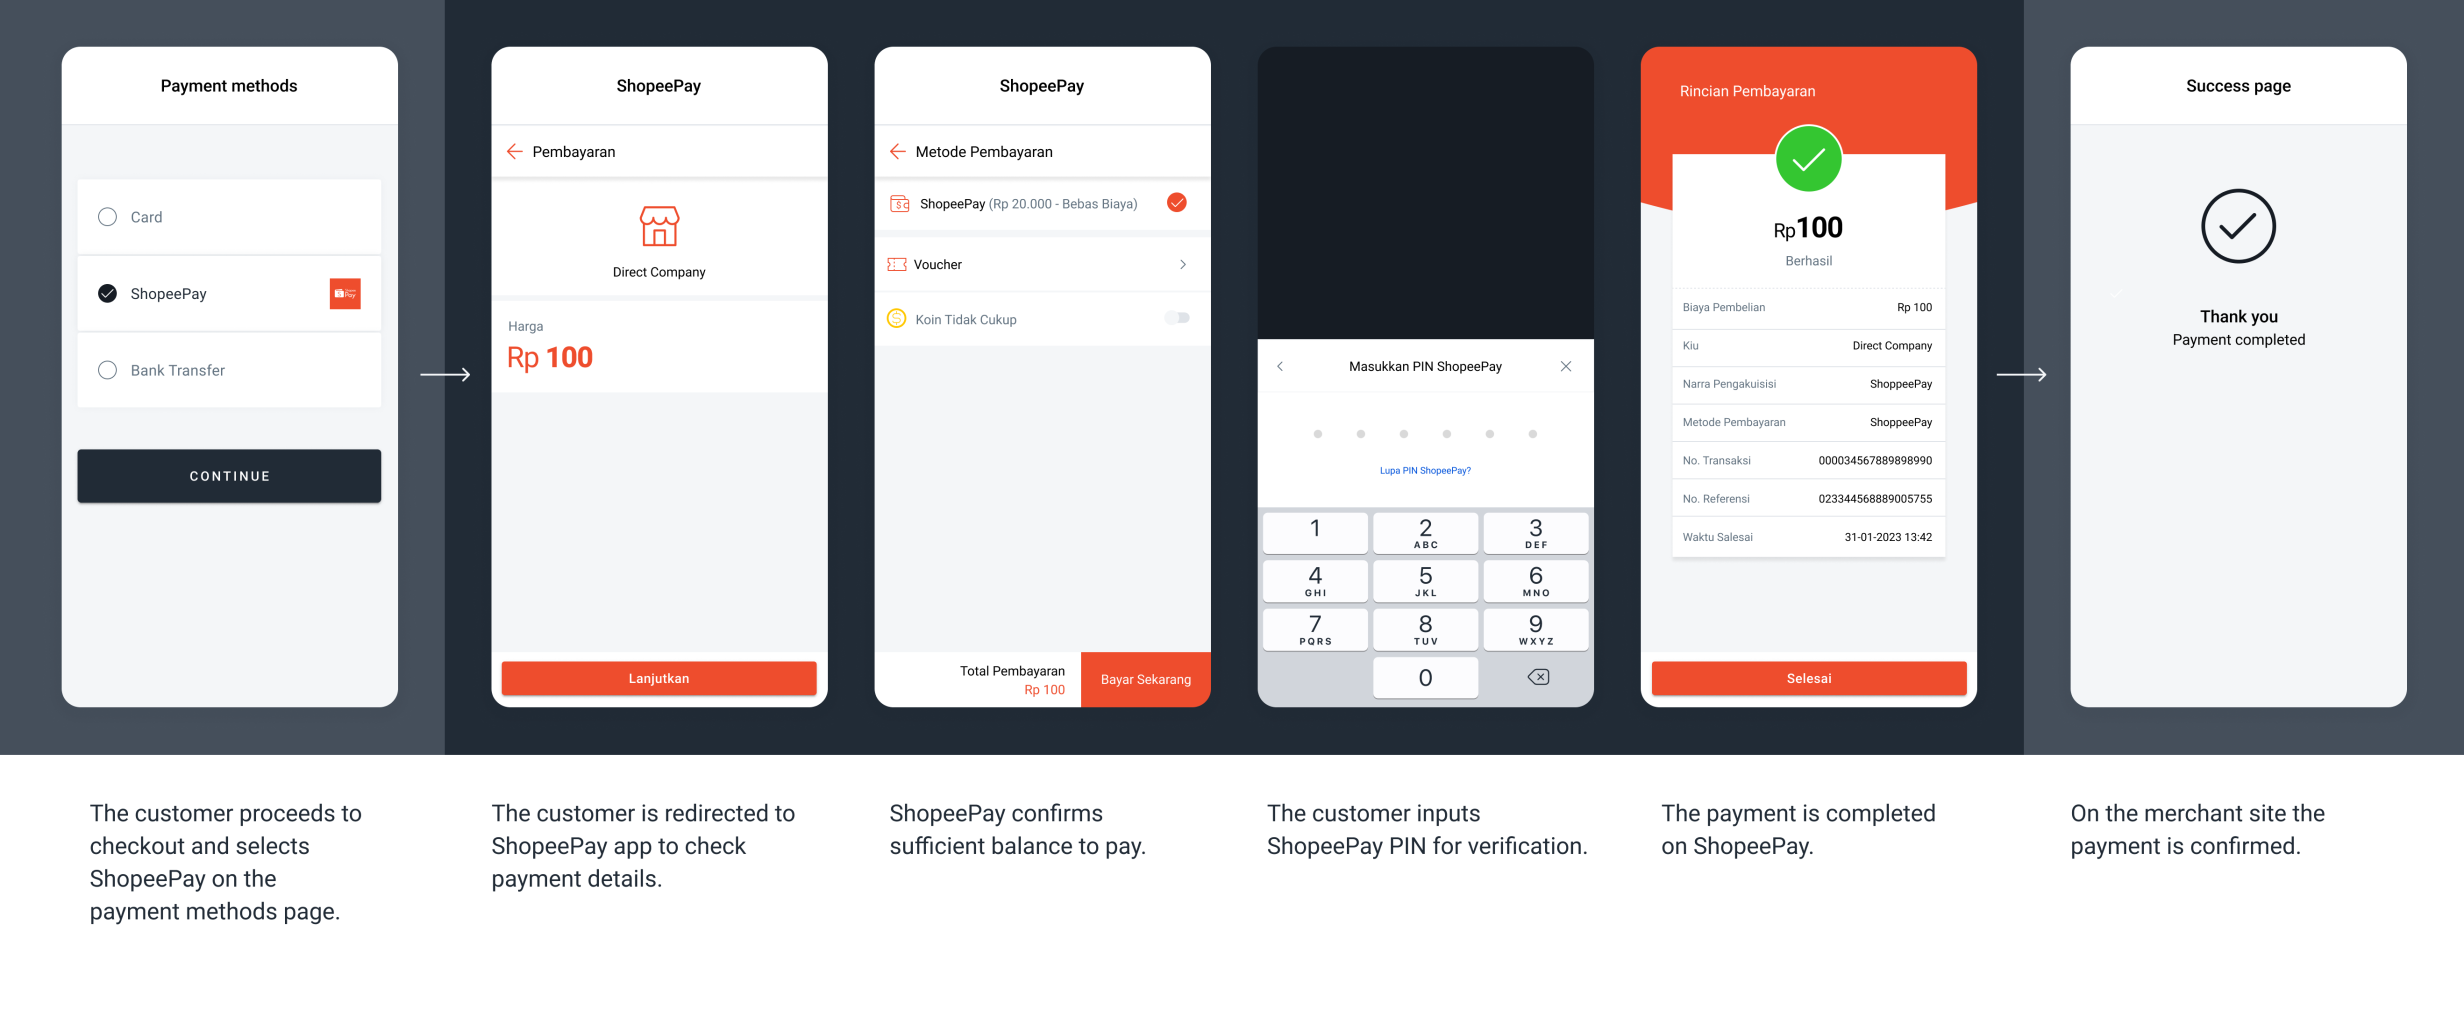 The screenshots illustrate a generic ShopeePay redirect flow.